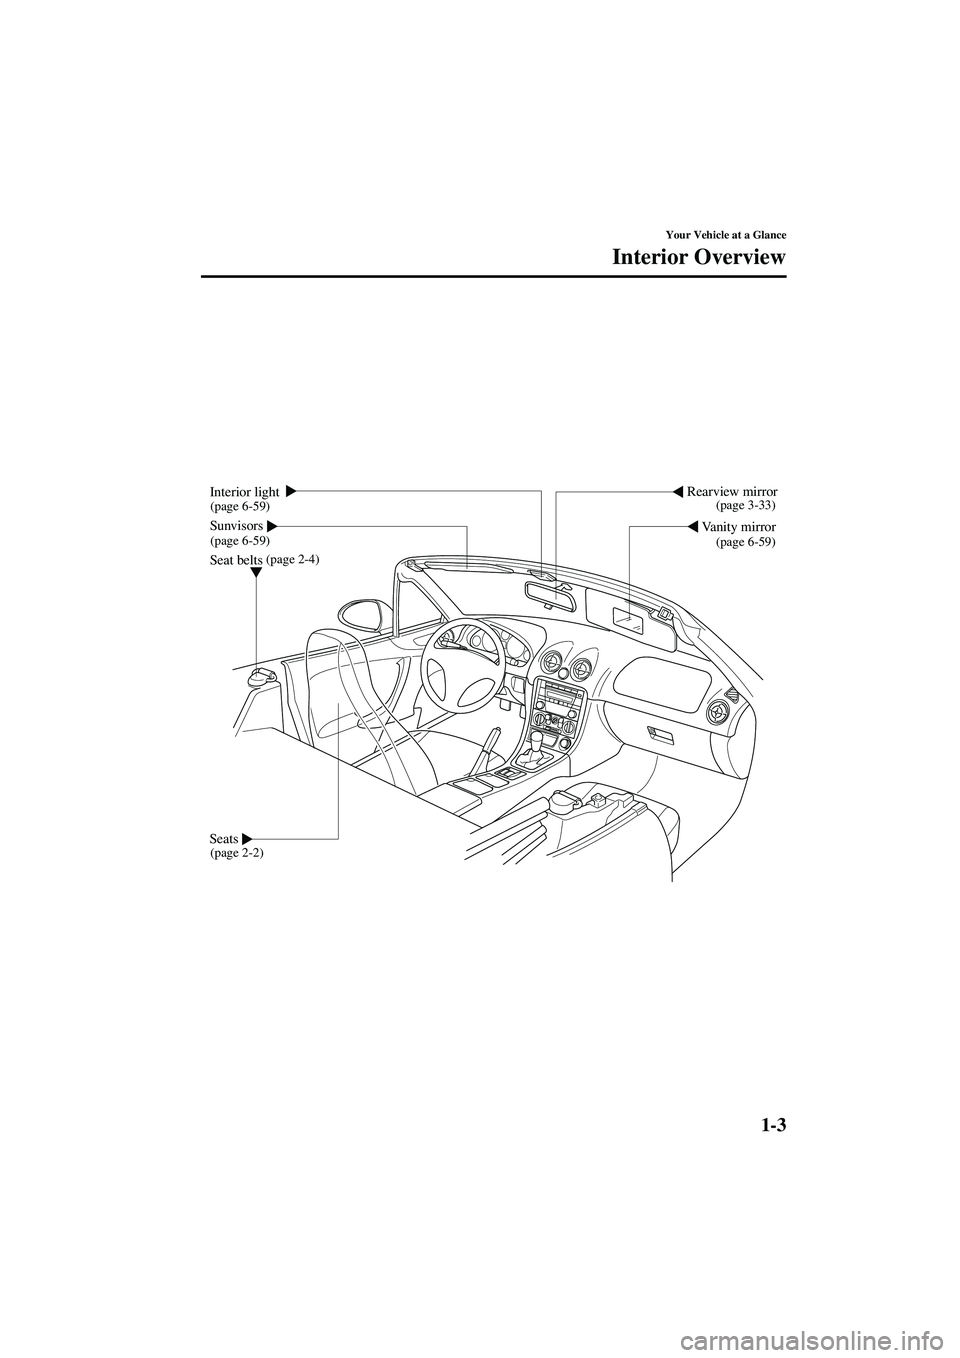 MAZDA MODEL MX-5 MIATA 2004  Owners Manual 1-3
Your Vehicle at a Glance
Form No. 8S15-EA-03G
Interior Overview
Vanity mirror
Rearview mirror
Seat beltsInterior light
Sunvisors
Seats
(page 6-59)
(page 6-59) (page 2-4)
(page 2-2) (page 6-59) (pa